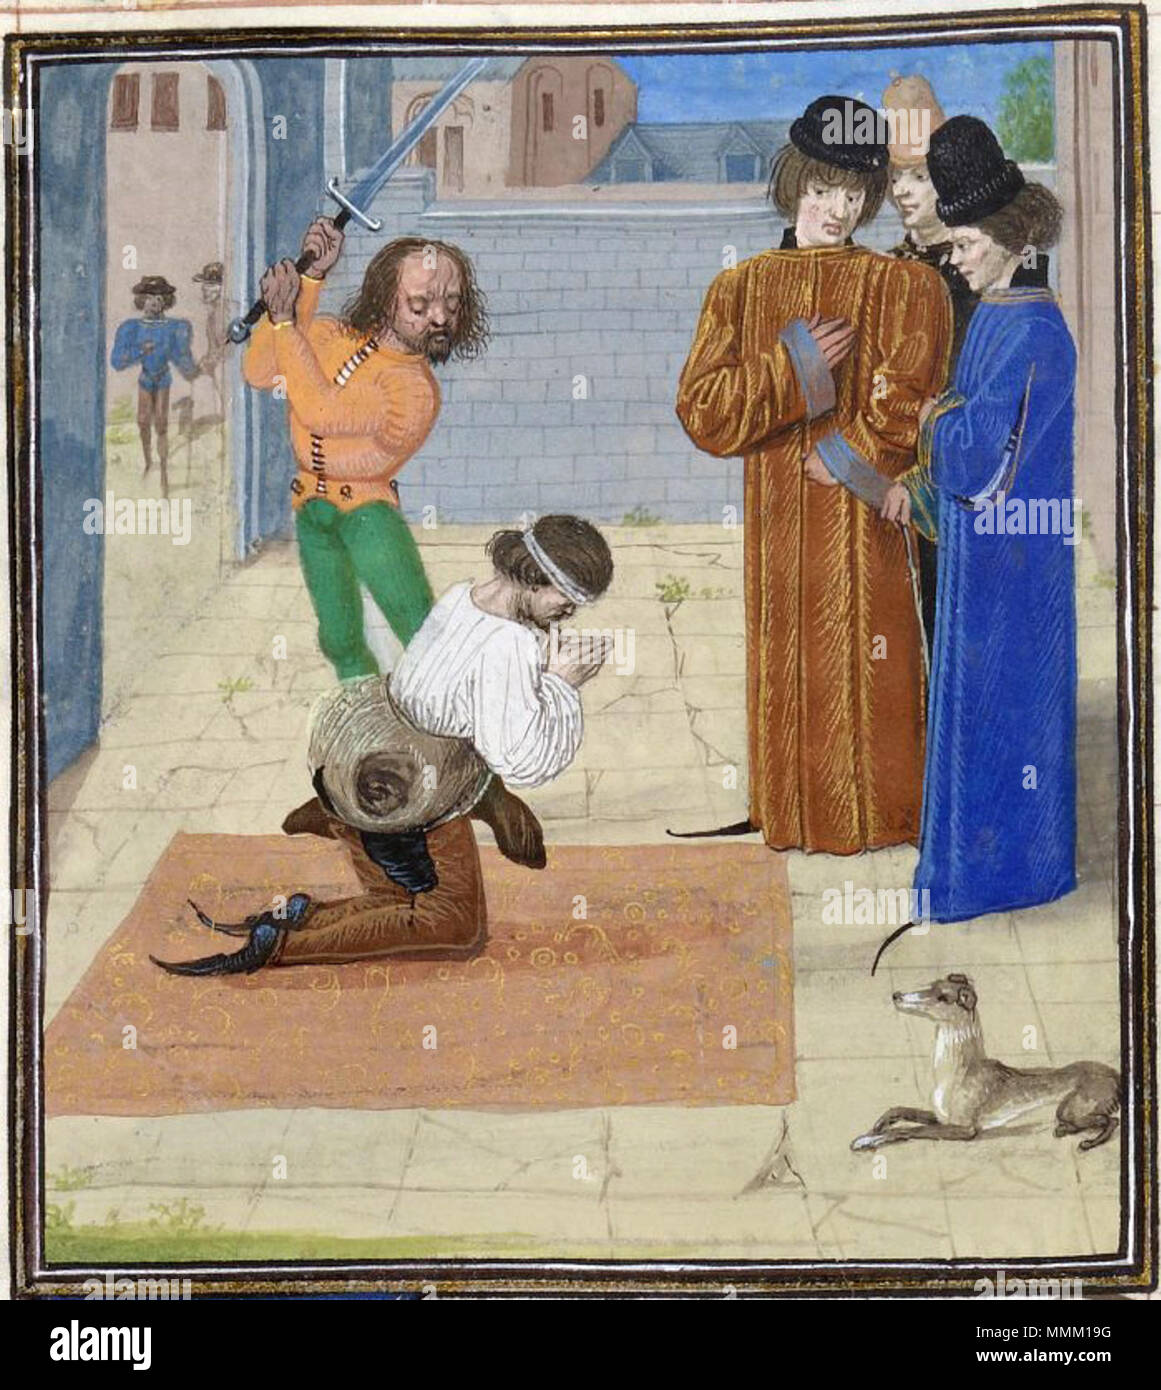 . English: The execution of Robert Tresilian, as depicted in Jean Froissart's Chroniques.  . 15th century.   Jean Froissart  (1337–1410)       Alternative names Jean Froissart. A chronicler of medieval France who wrote 'Froissart's Chronicles' which is an important source of information for the first half of the Hundred Years' War.  Description French chronicler, historian, canon, poet and writer  Date of birth/death 1330s 1405  Location of birth/death Valenciennes Chimay  Authority control  : Q315000 VIAF:?100178580 ISNI:?0000 0001 1821 9033 LCCN:?n50023448 NLA:?35105465 GND:?118536370 WorldC Stock Photo